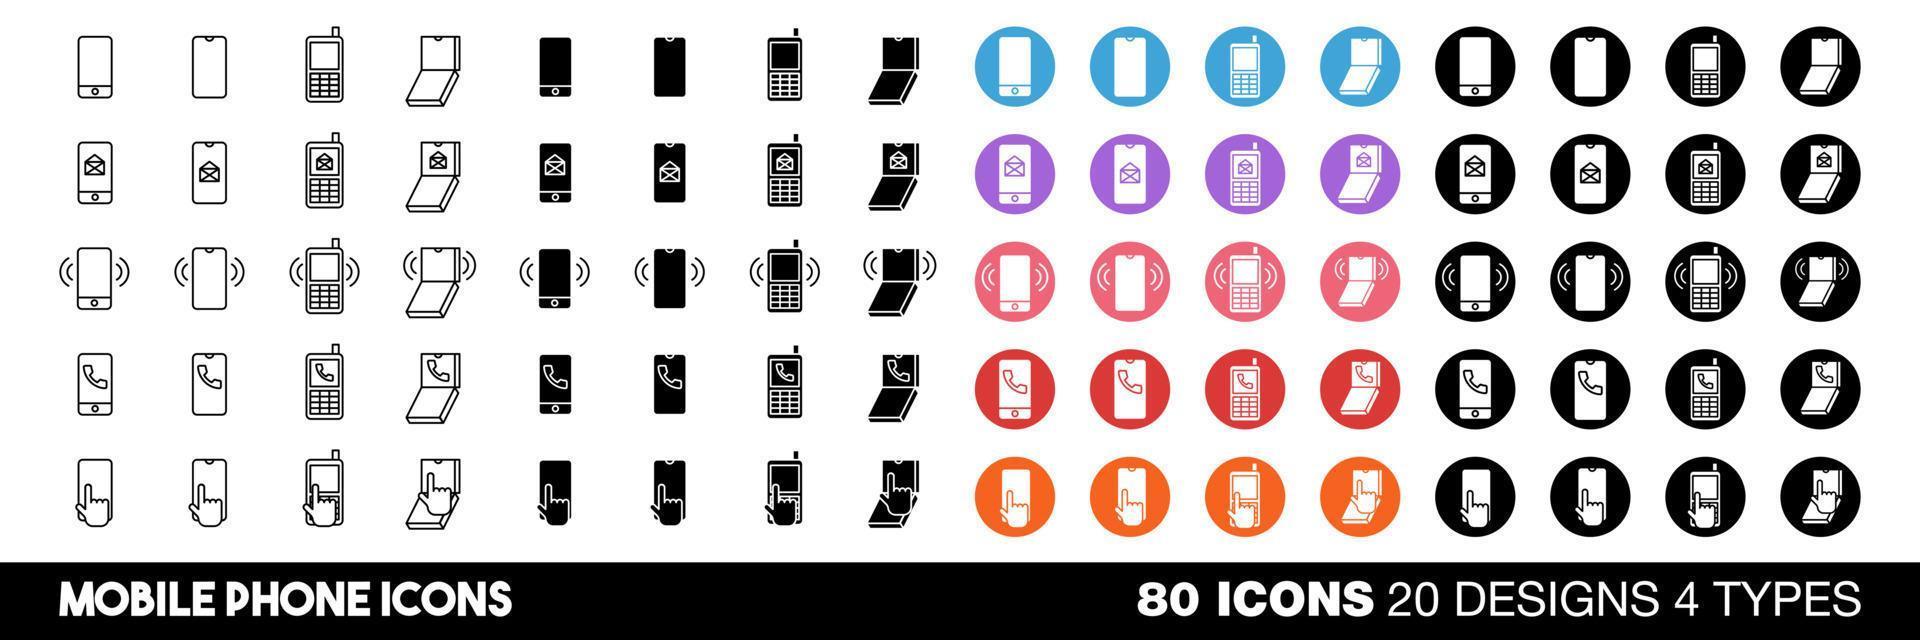 Mobile icons vector set collection graphic design